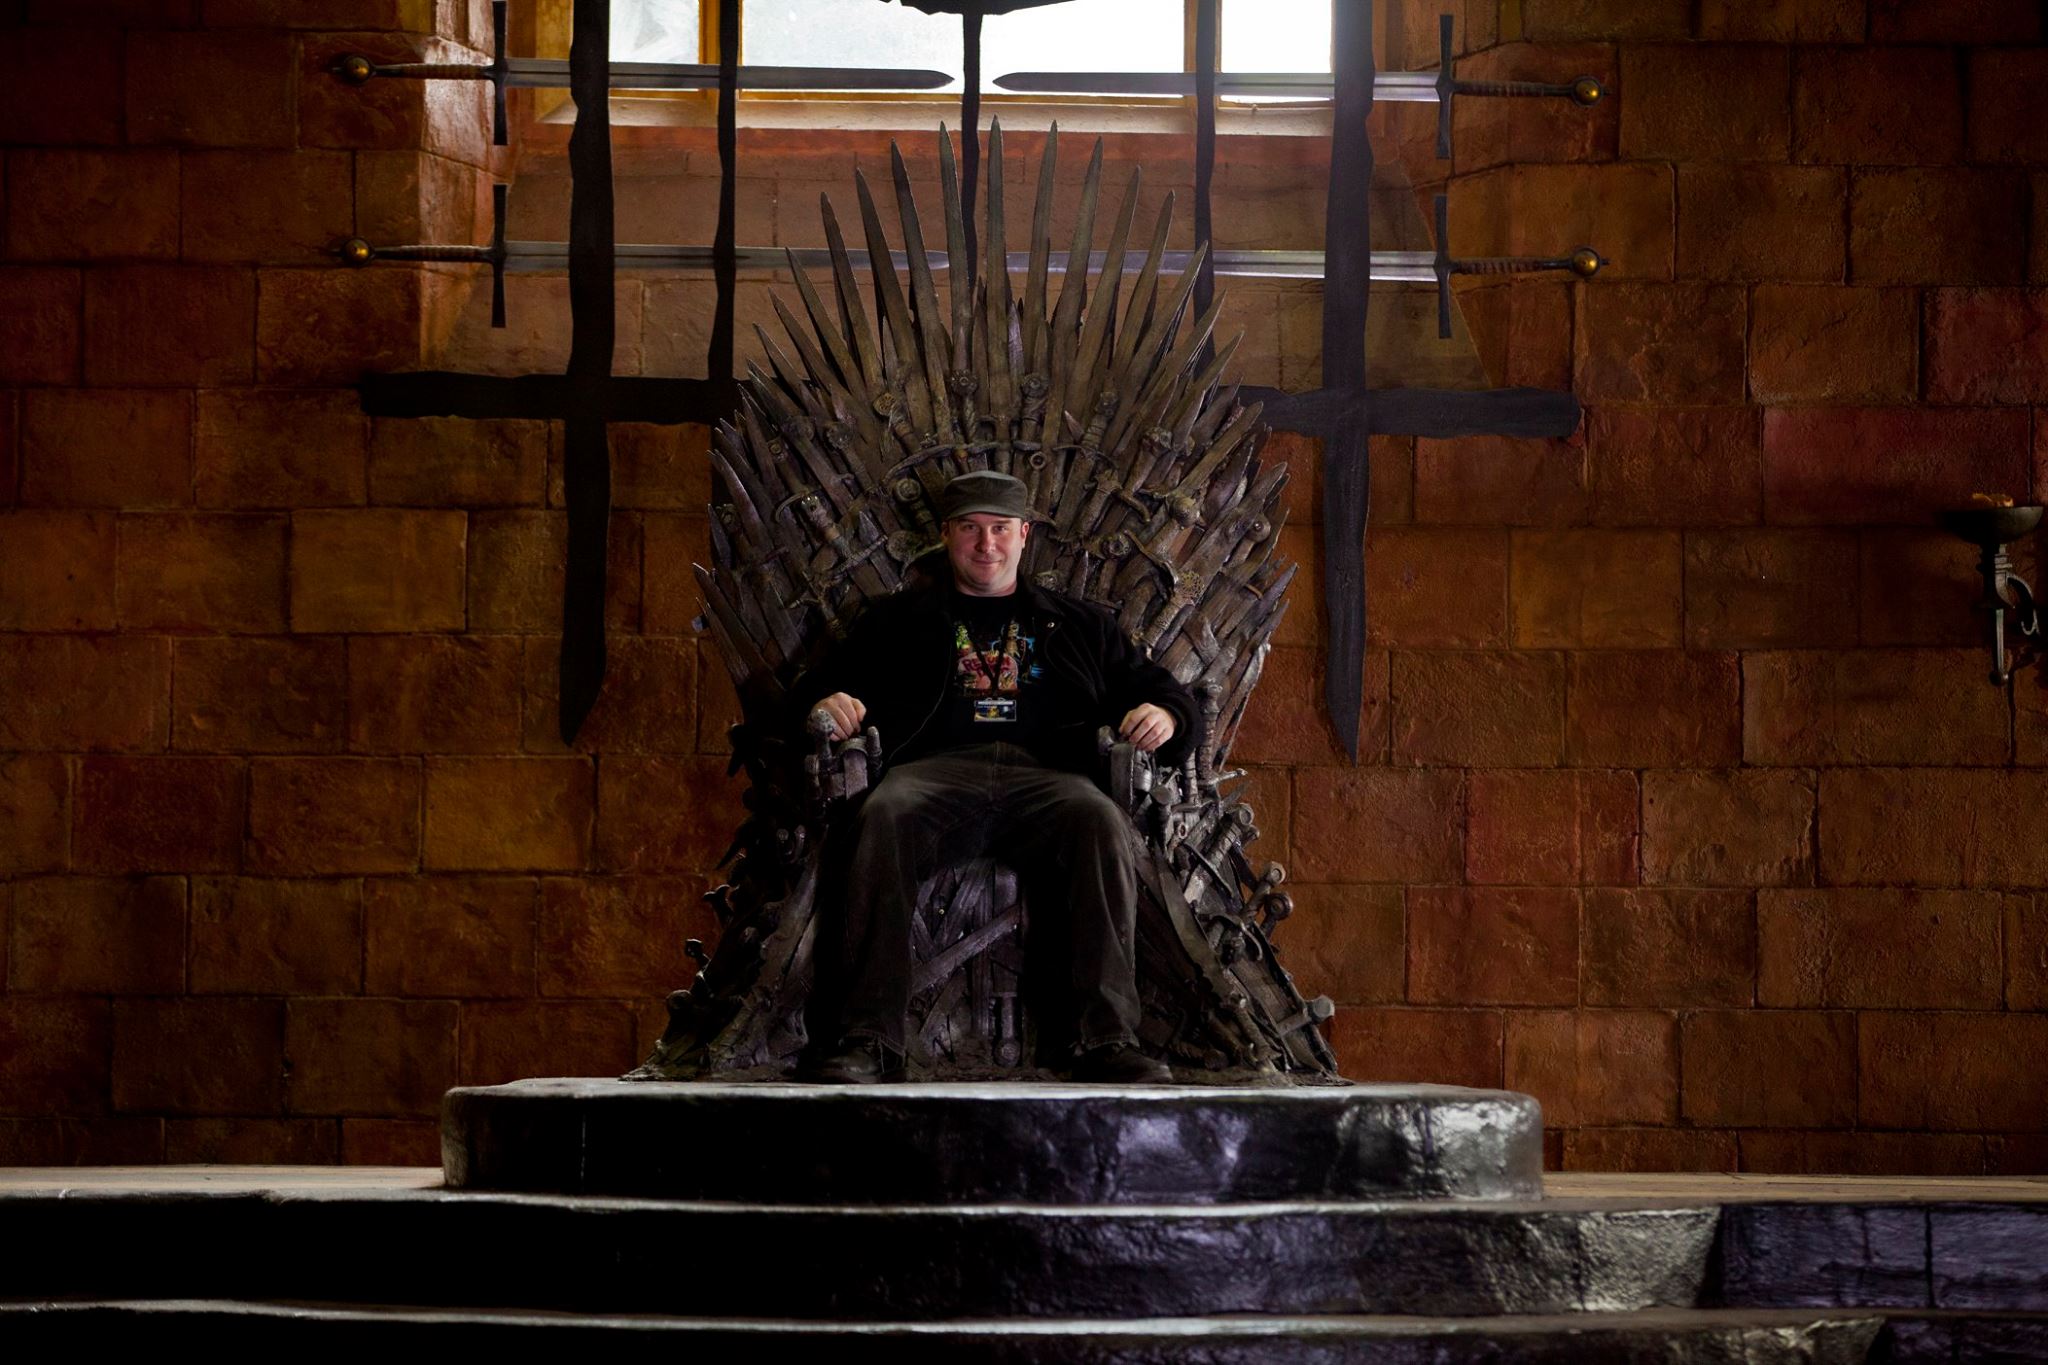 Jack Bennett seated on The Iron Throne on the set of HBO's GAME OF THRONES.